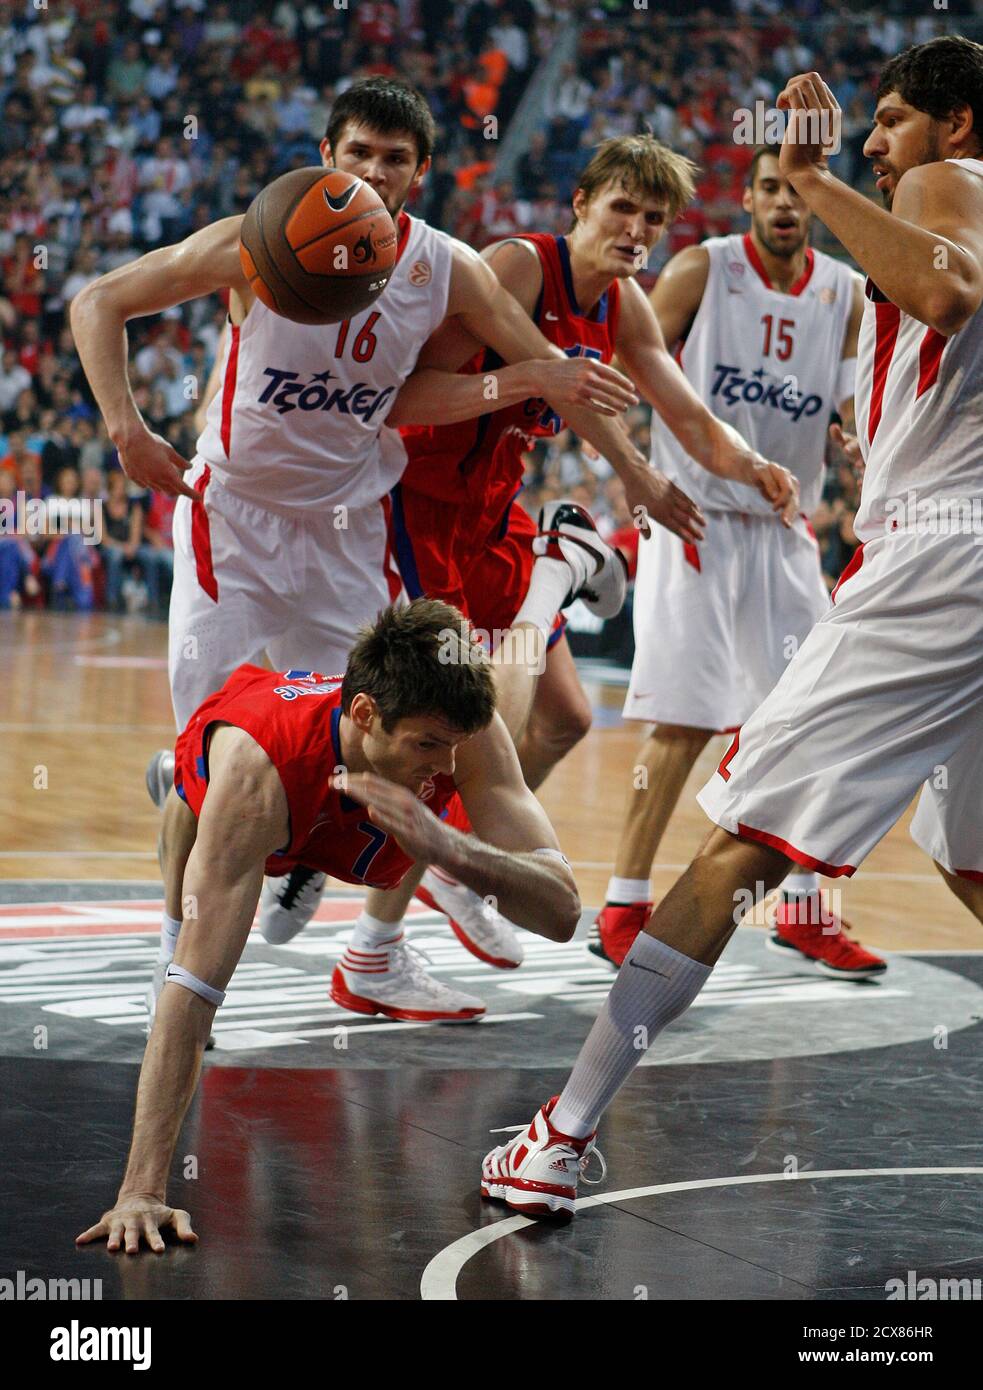 Darjus Lavrinovic (C) of CSKA Moscow fights for the ball against Kostas  Papanikolaou (L) and Lazaros Papadopoulos of Olympiacos during their  Euroleague basketball Final Four final match in Istanbul May 13, 2012.